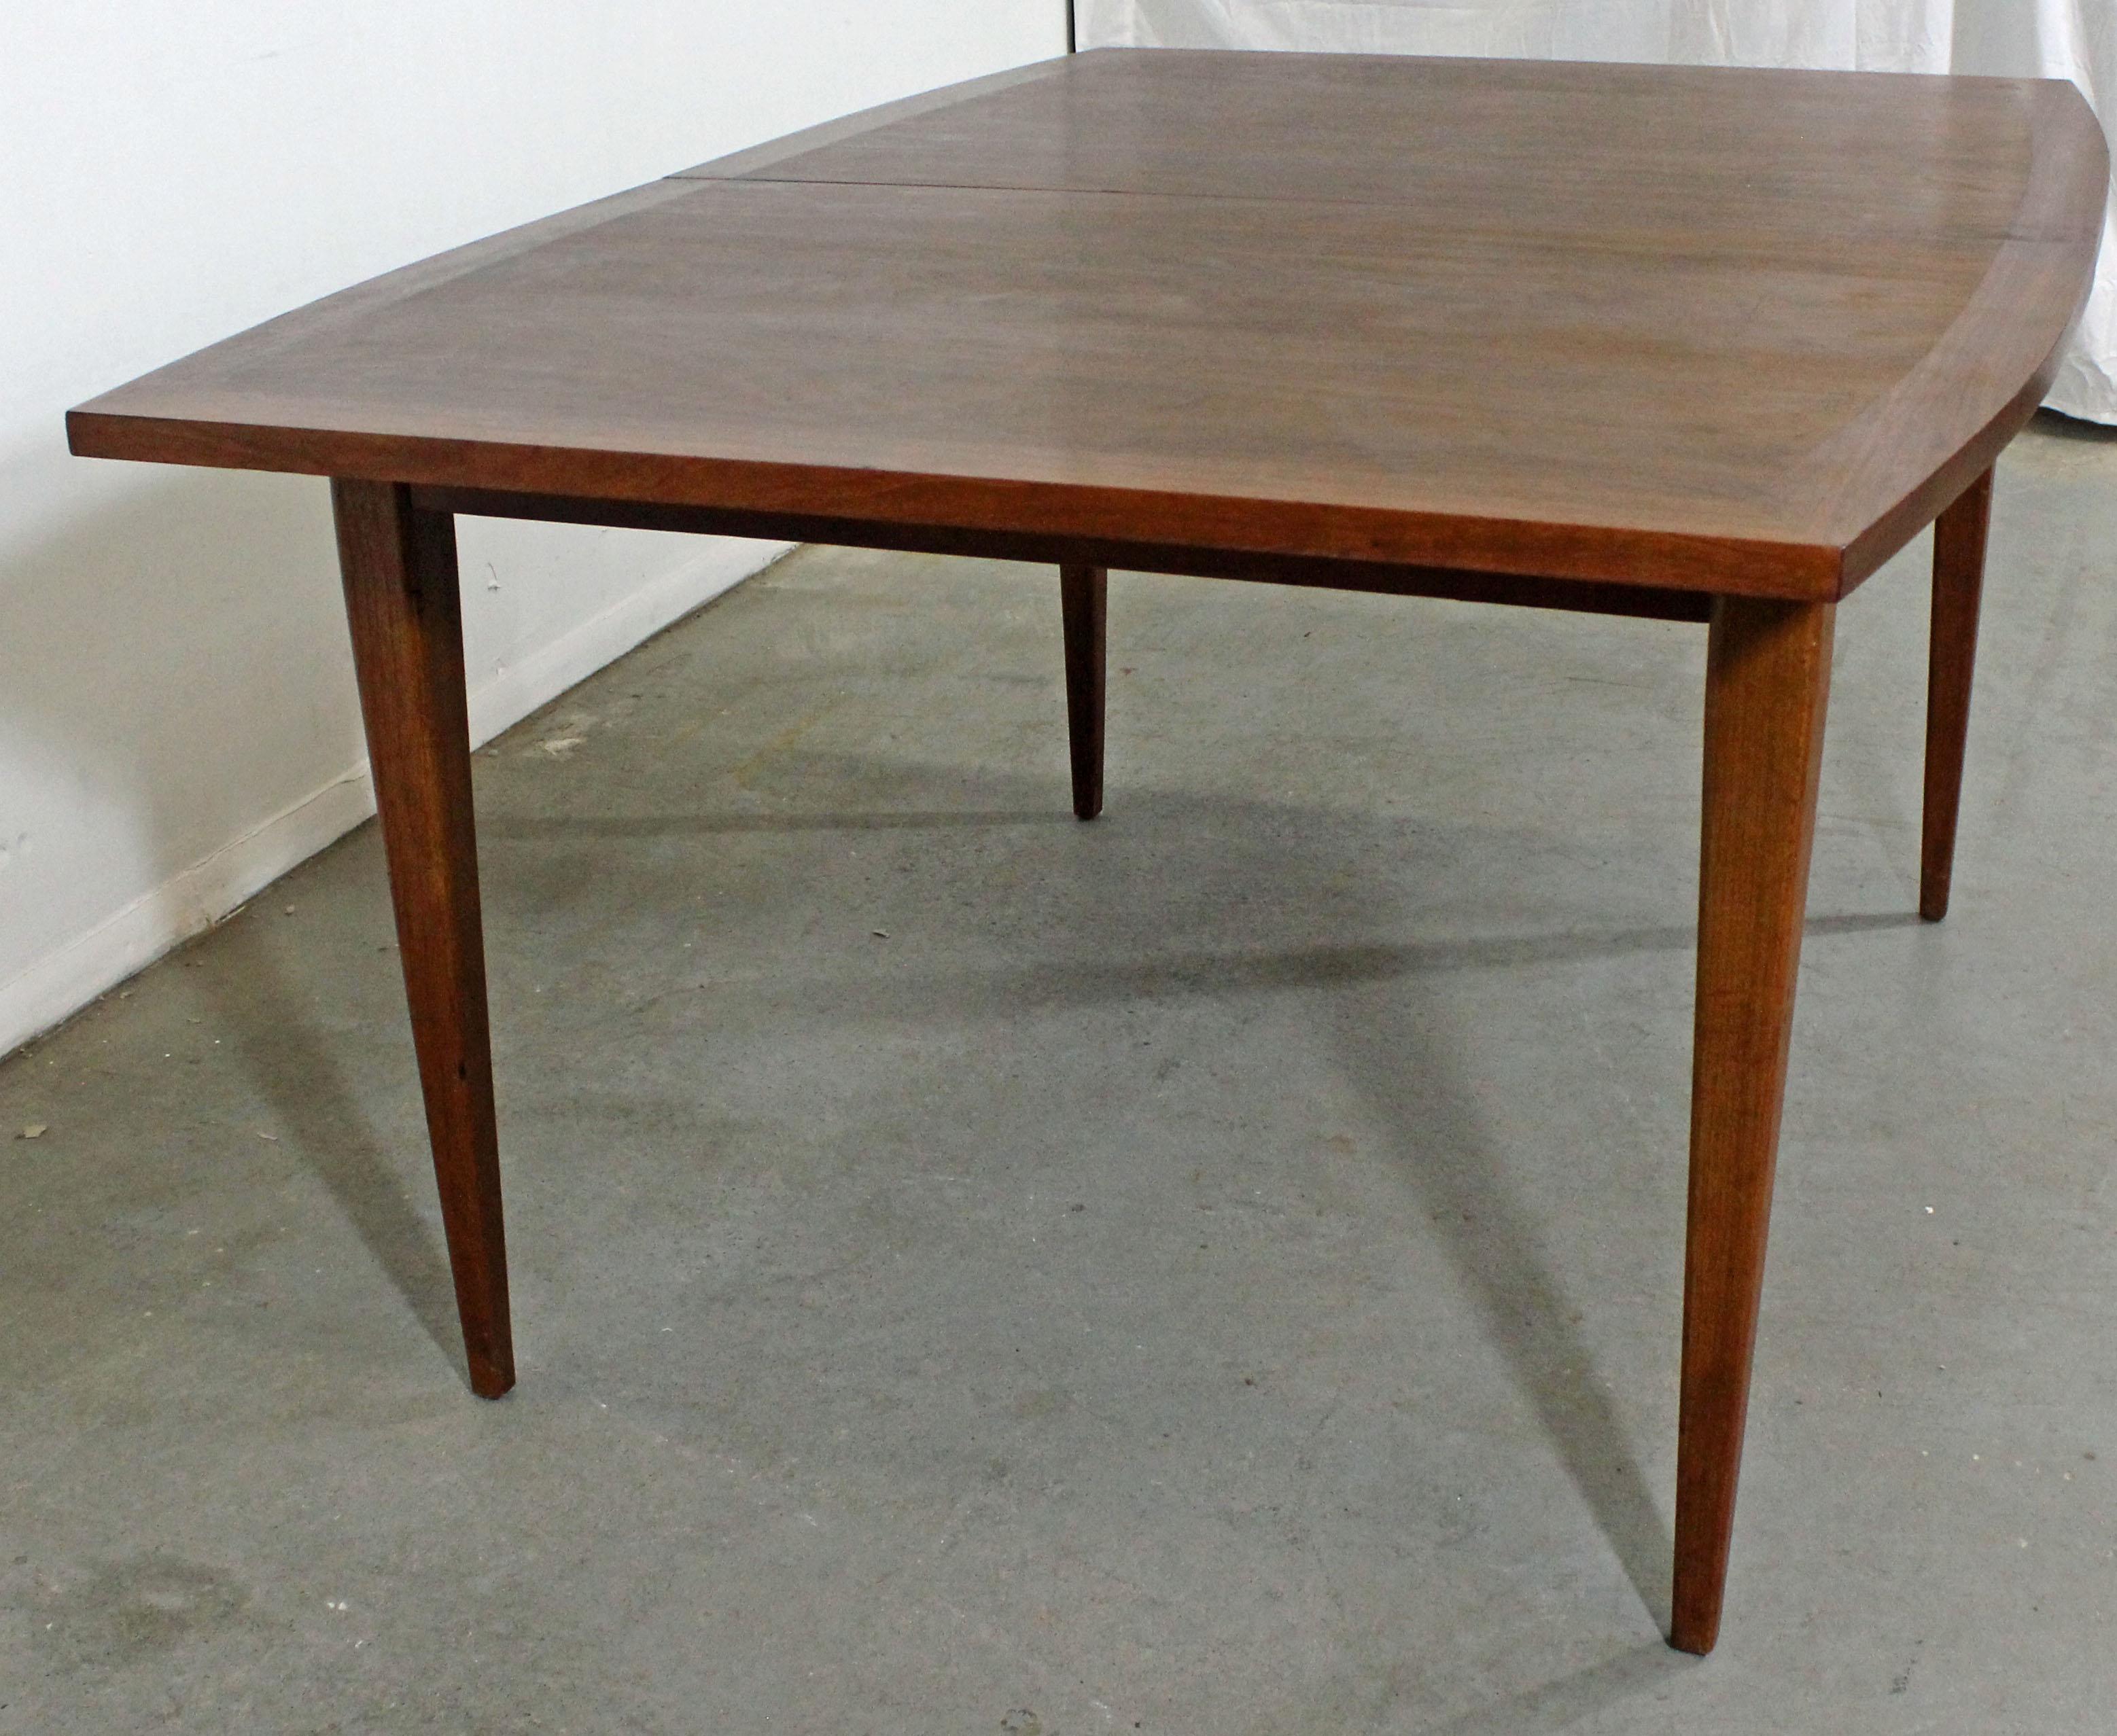 Offered is a Mid-Century Modern walnut dining table with a surfboard-top and three extension boards. It is in good condition, showing some surface/age wear (veneer chips, scratches-- see photos). It is not signed. Check out our other listings for